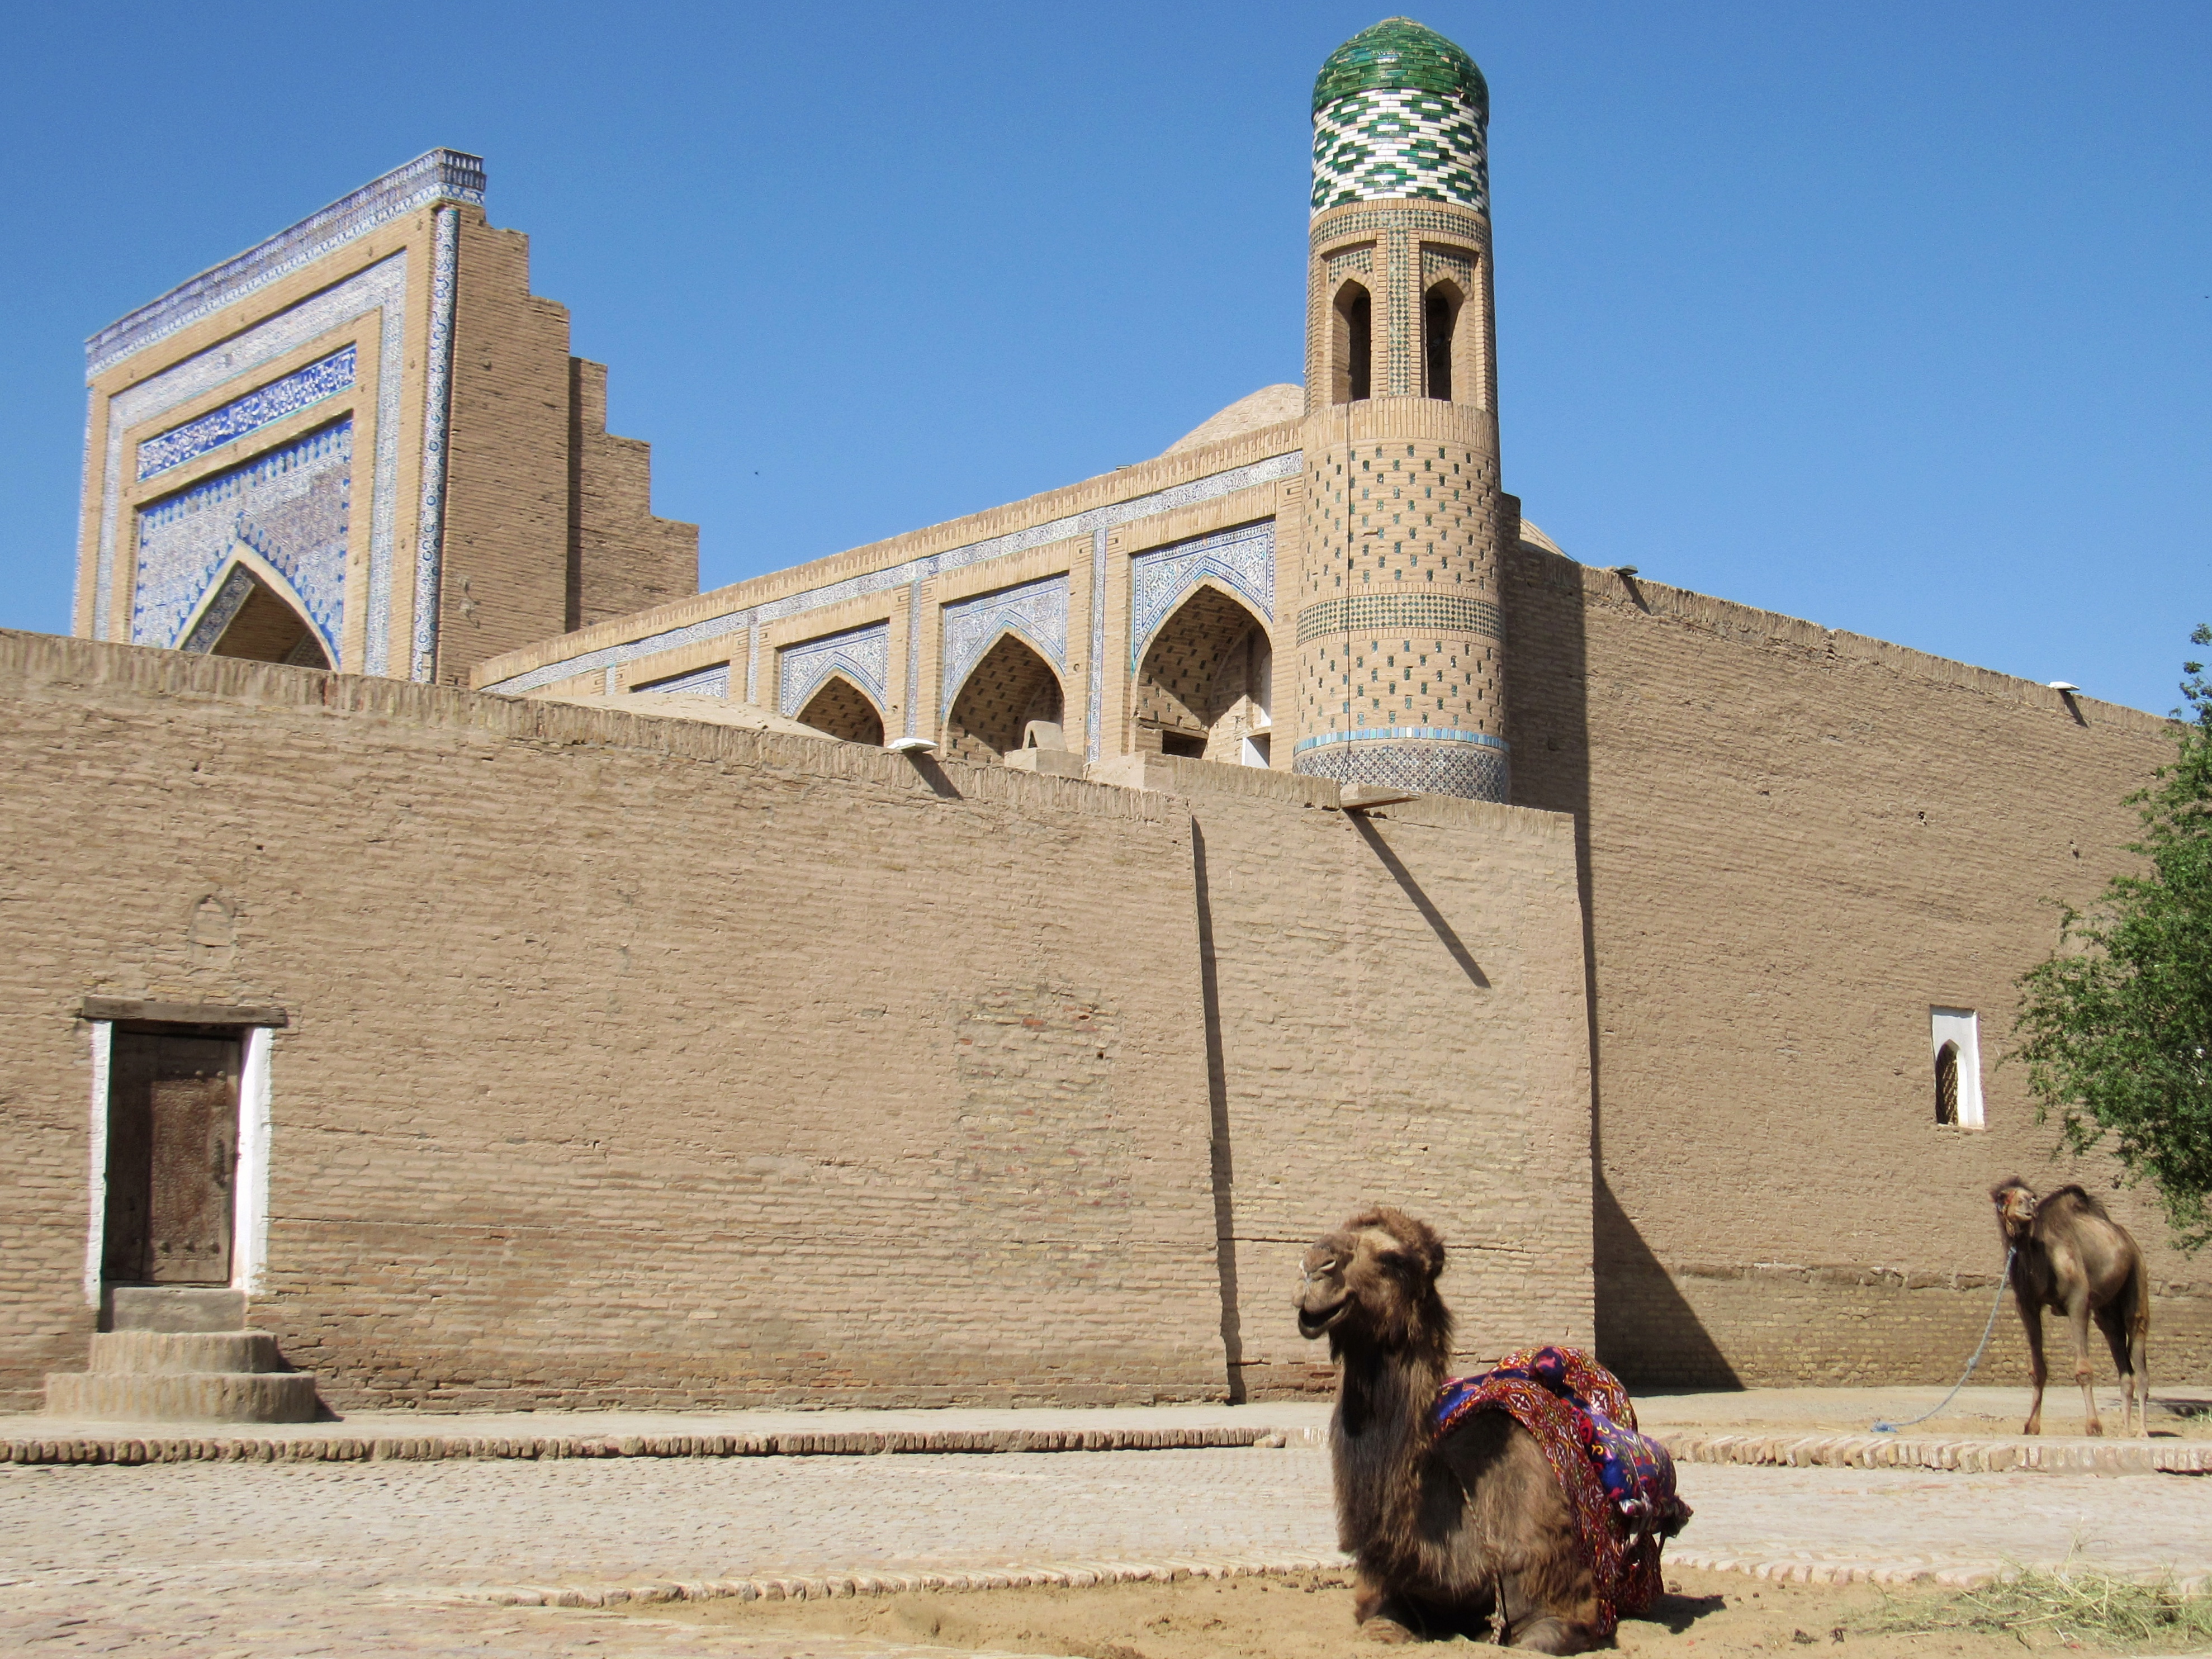 Buildings and camels in Khiva